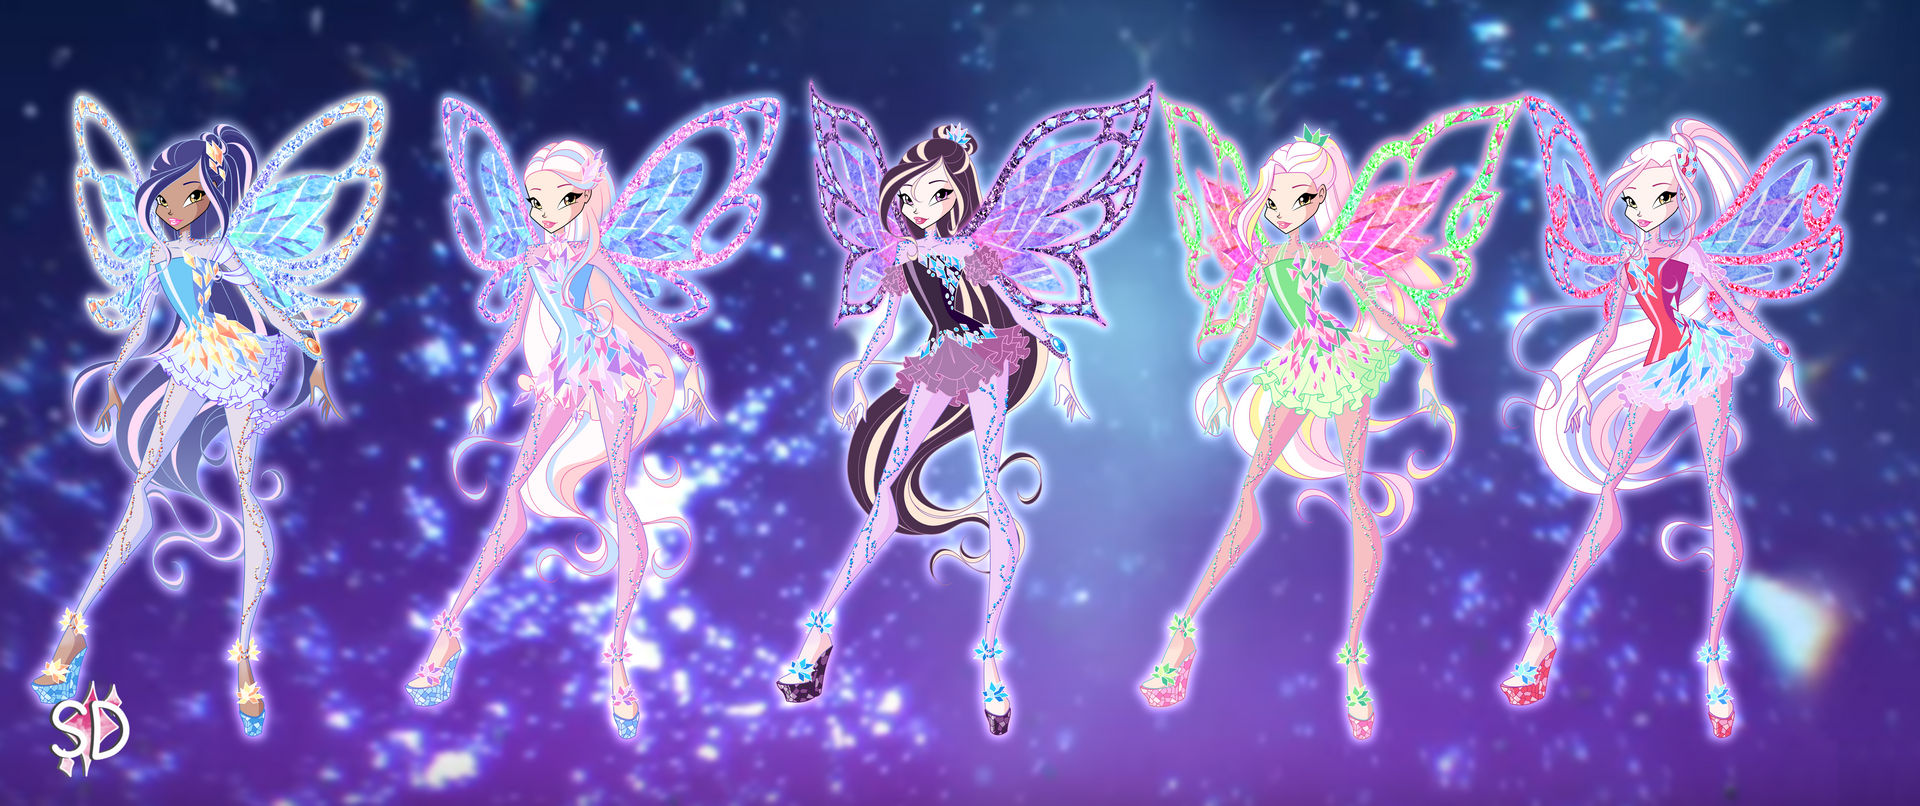 WINX: Commission Fairy Dust by Sparkle-Dream on DeviantArt